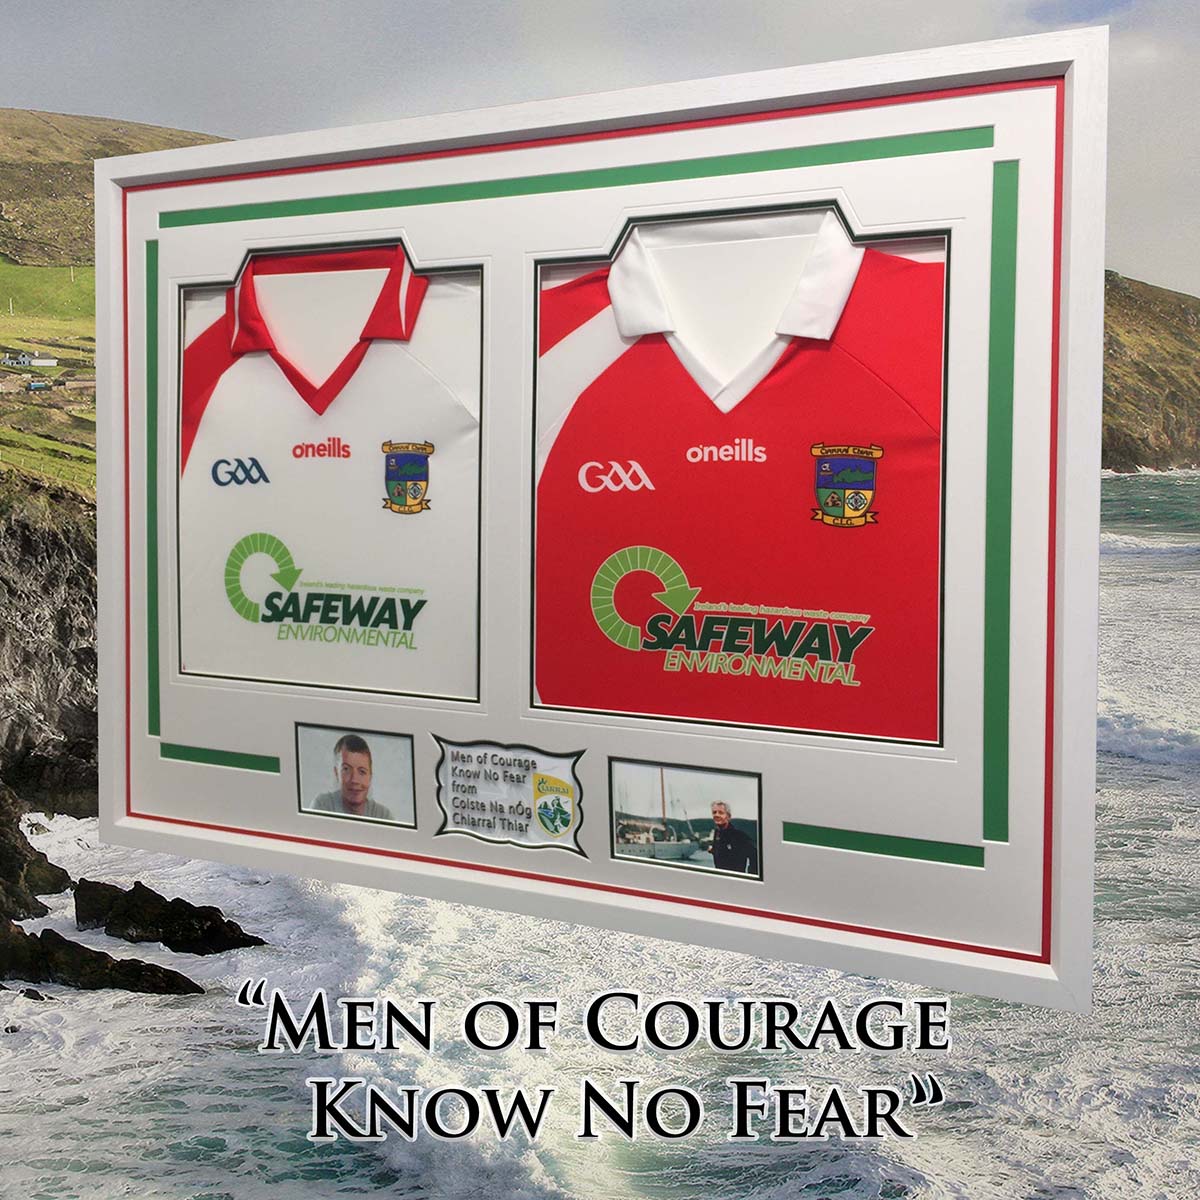 Framed Jerseys for Men of Courage & the Wild Atlantic - with inscription